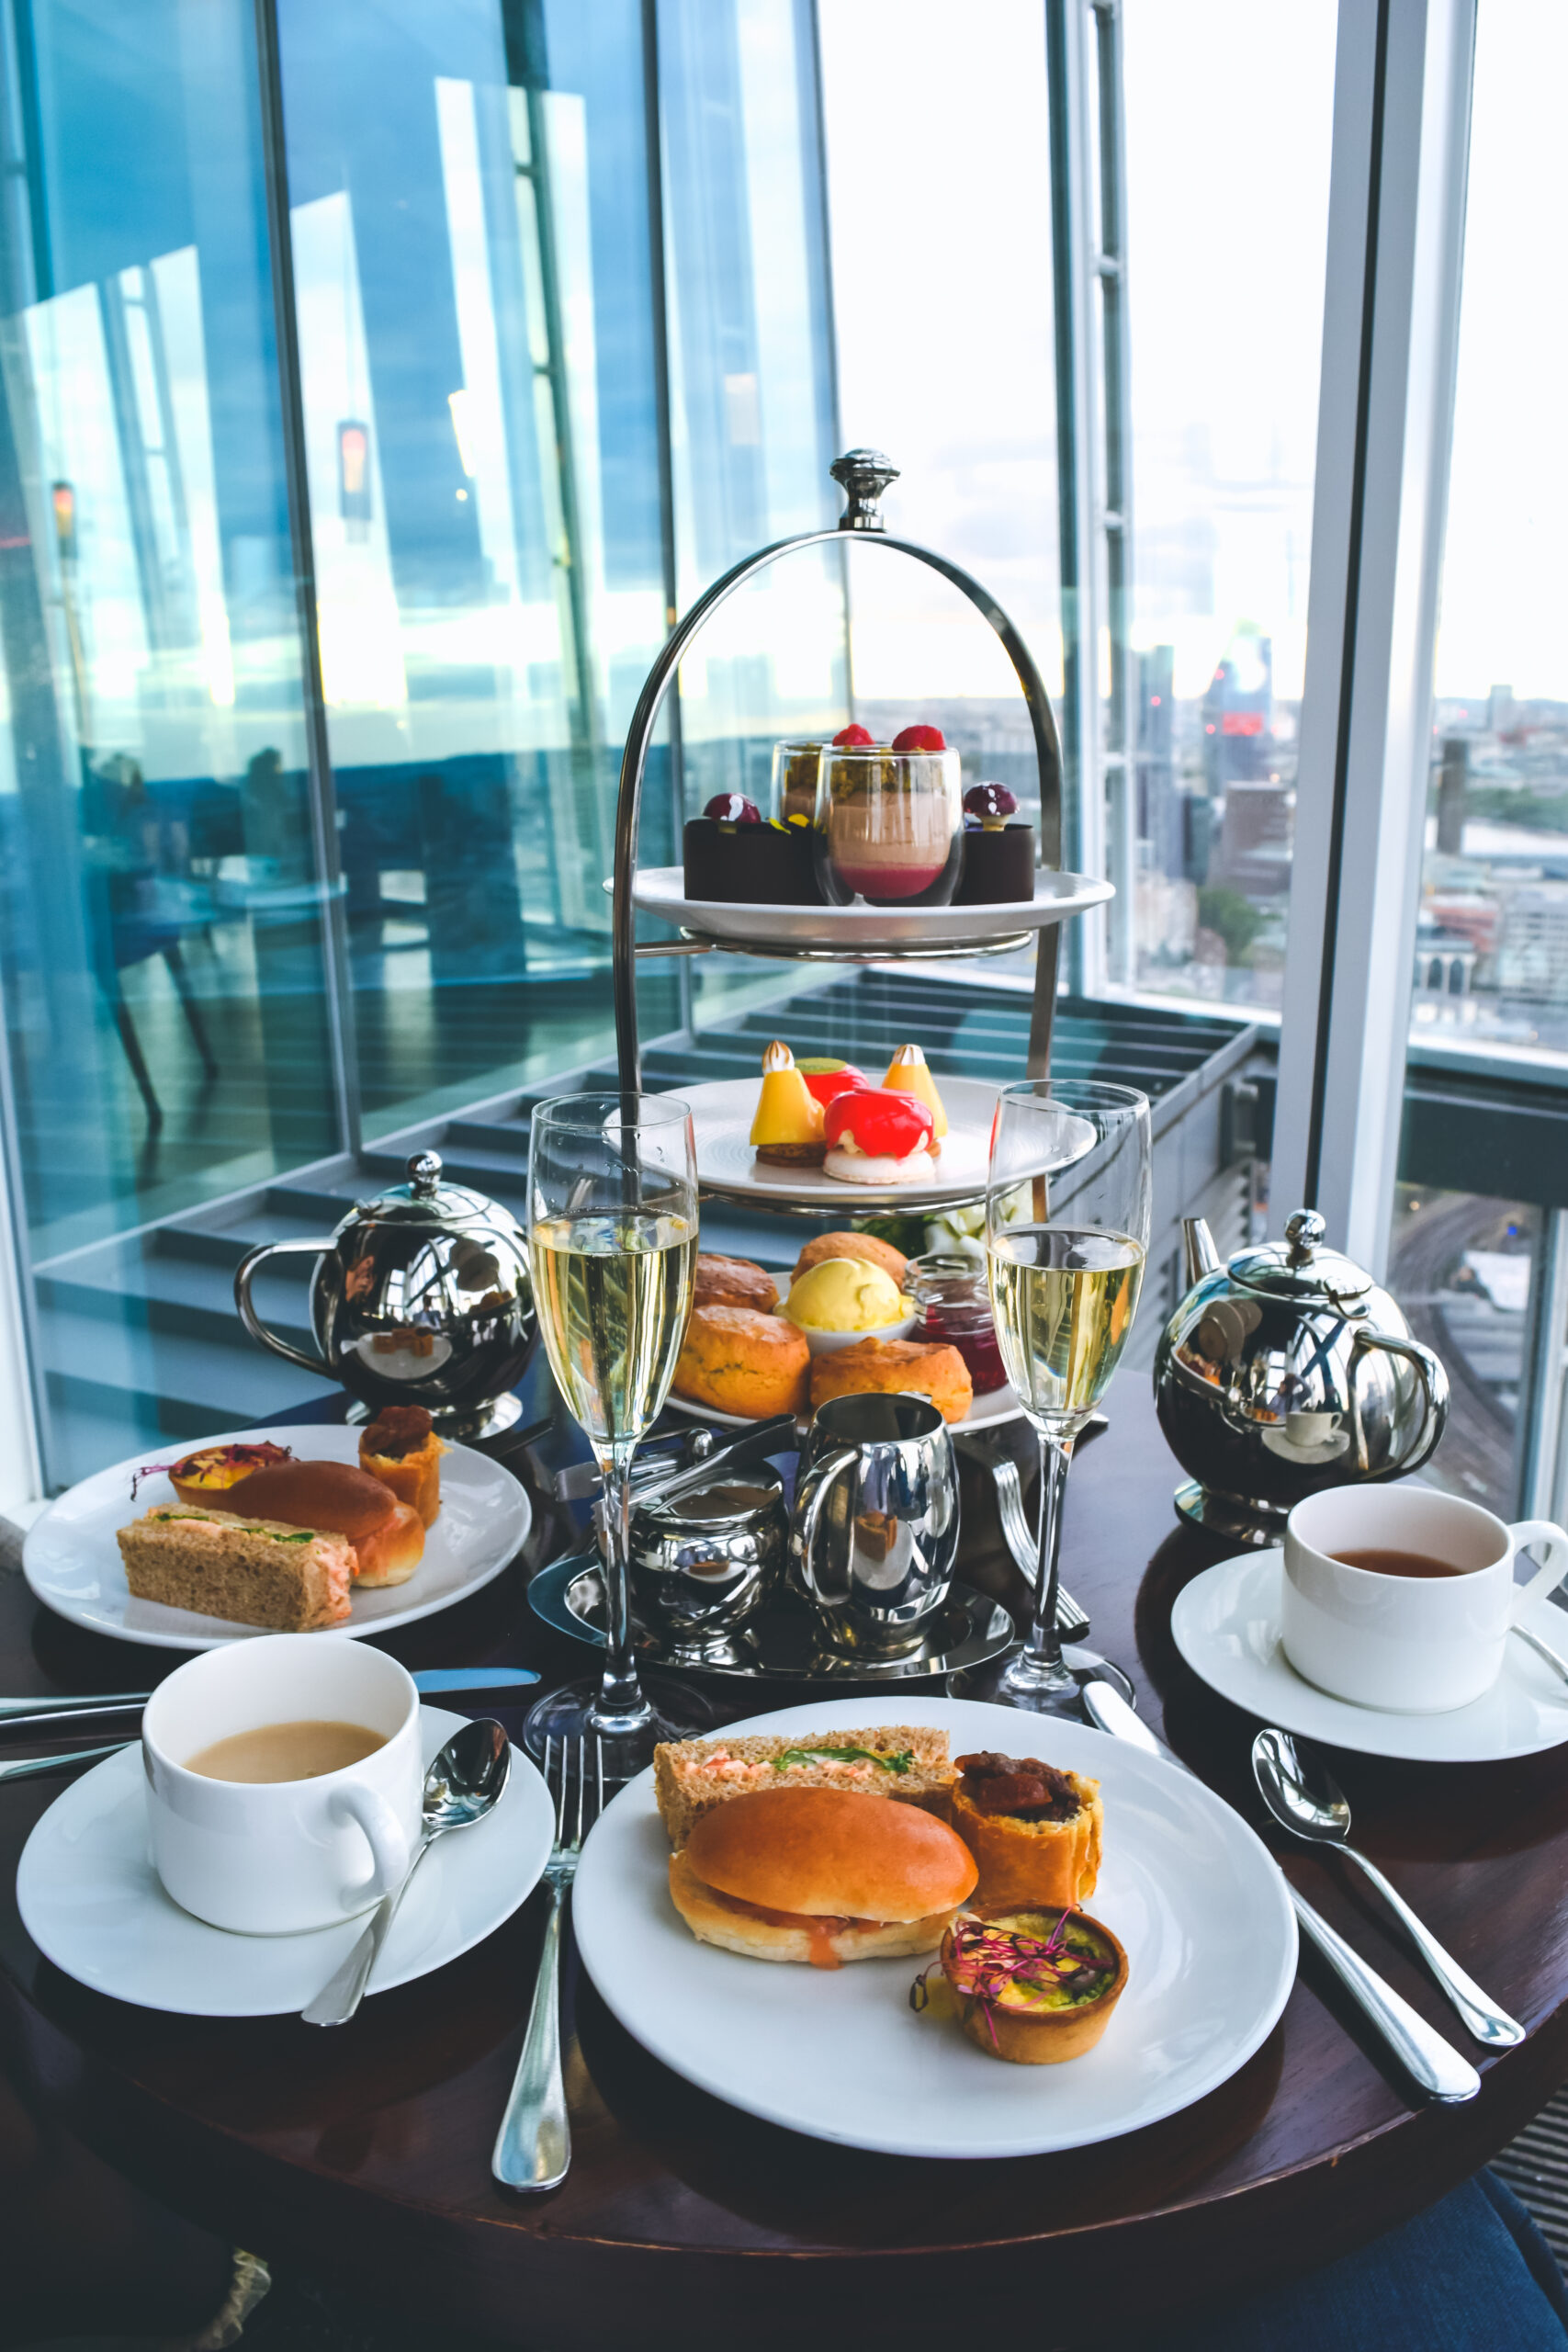 aqua shard champagne afternoon tea Travel guide to london uk blog what to do what to see where to go 3 days-19